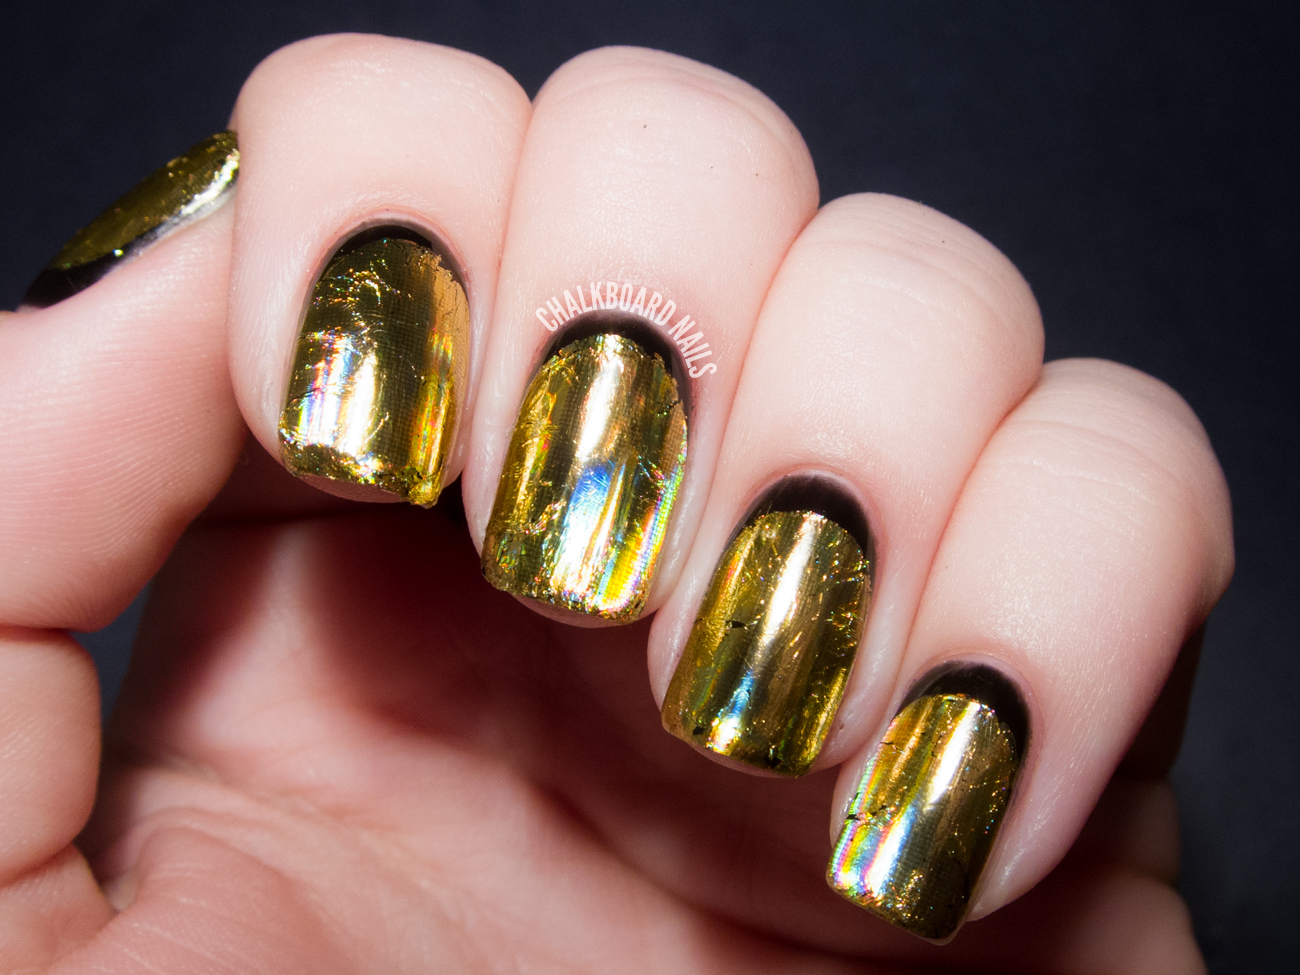 nail art design in black and gold